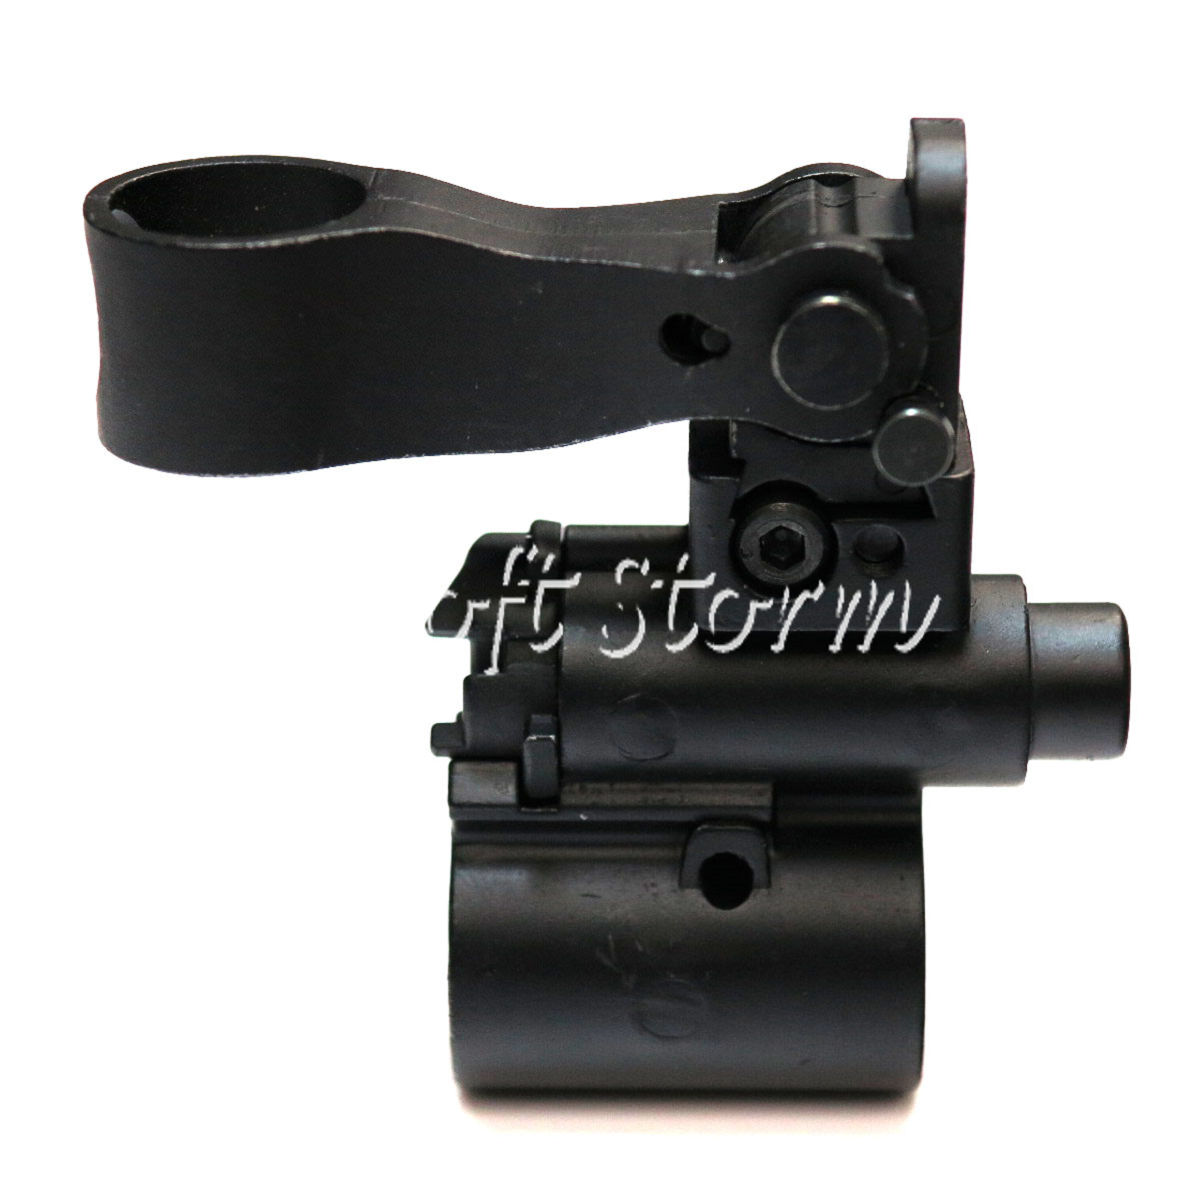 Airsoft AEG Tactical Gear D-Boys SCAR Type Metal Flip Up Front Sight